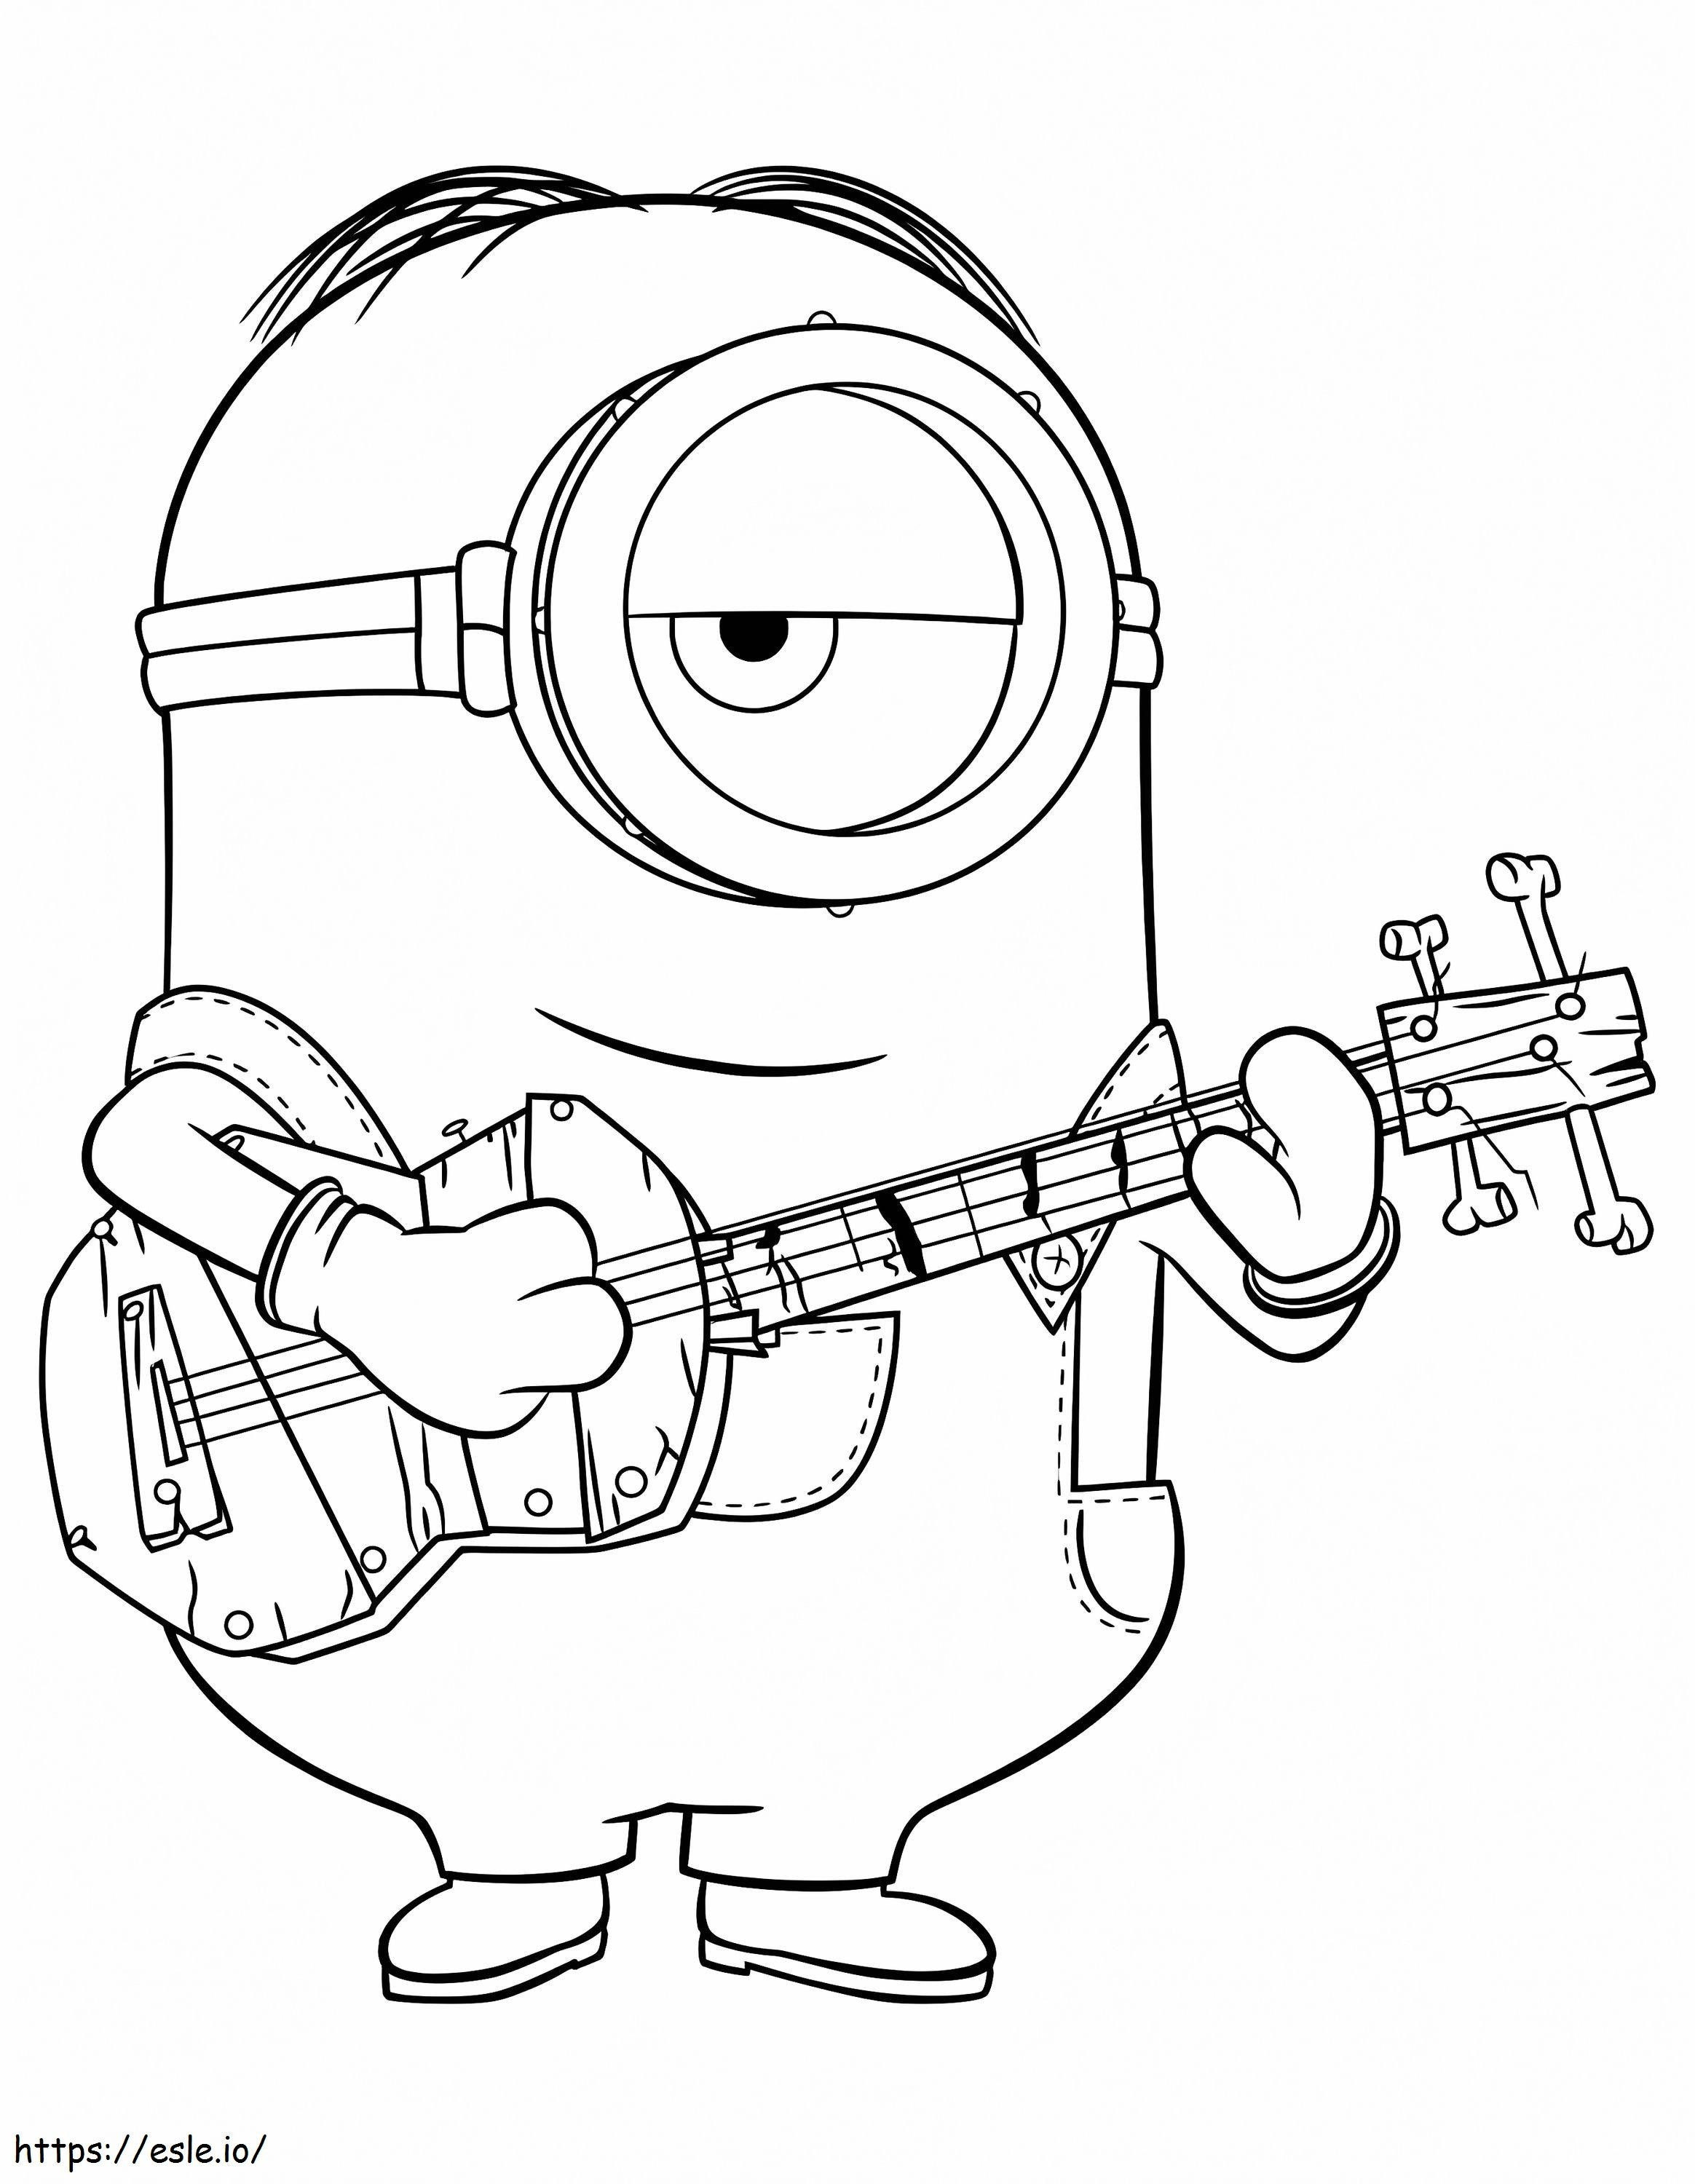 Minion Plays The Guitar coloring page